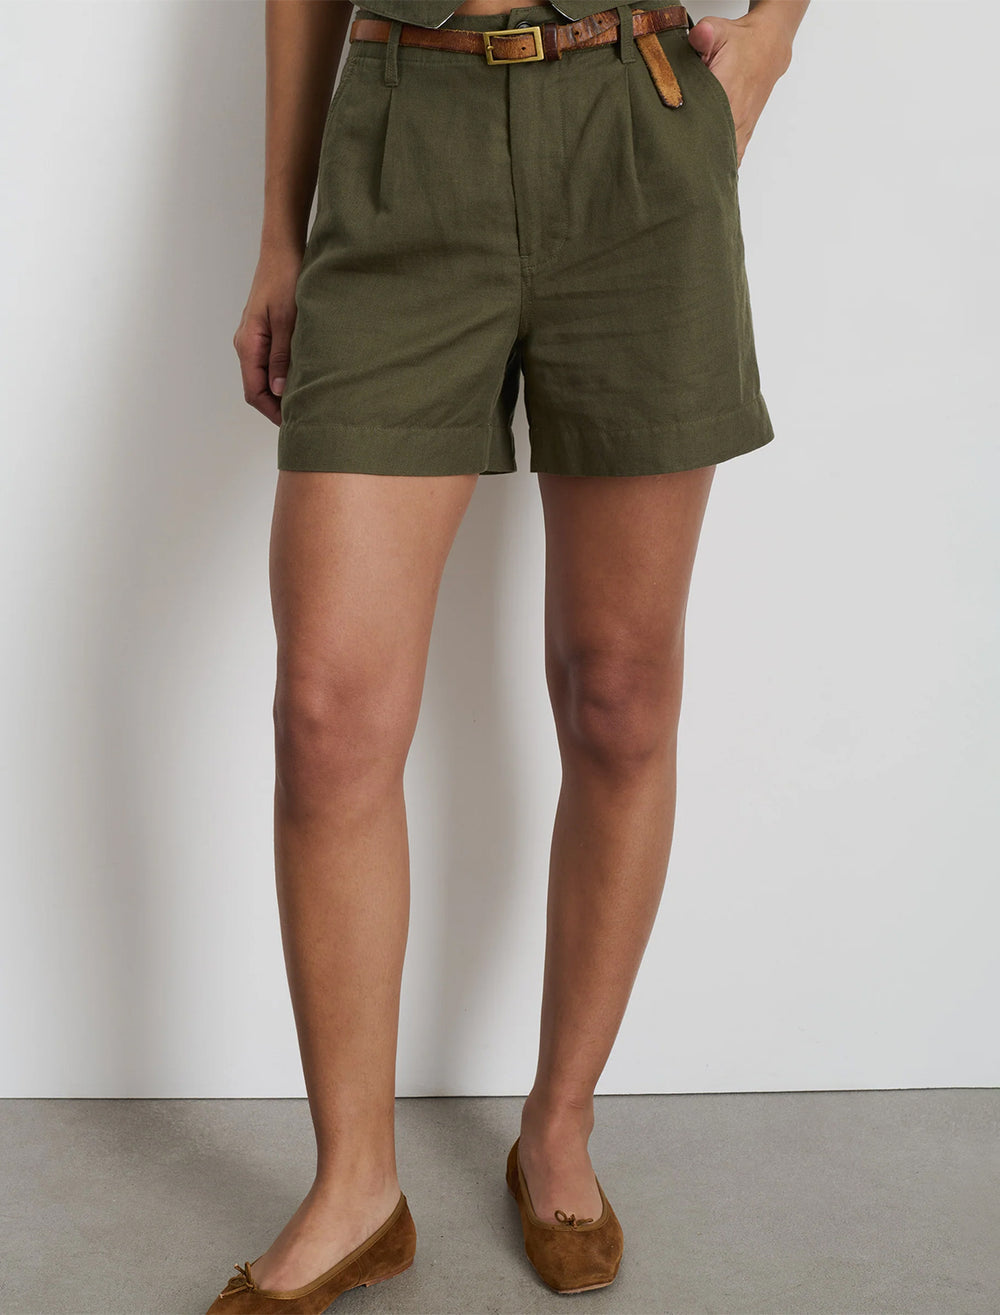 Model wearing Alex Mill's pleated twill shorts in pulgia olive.